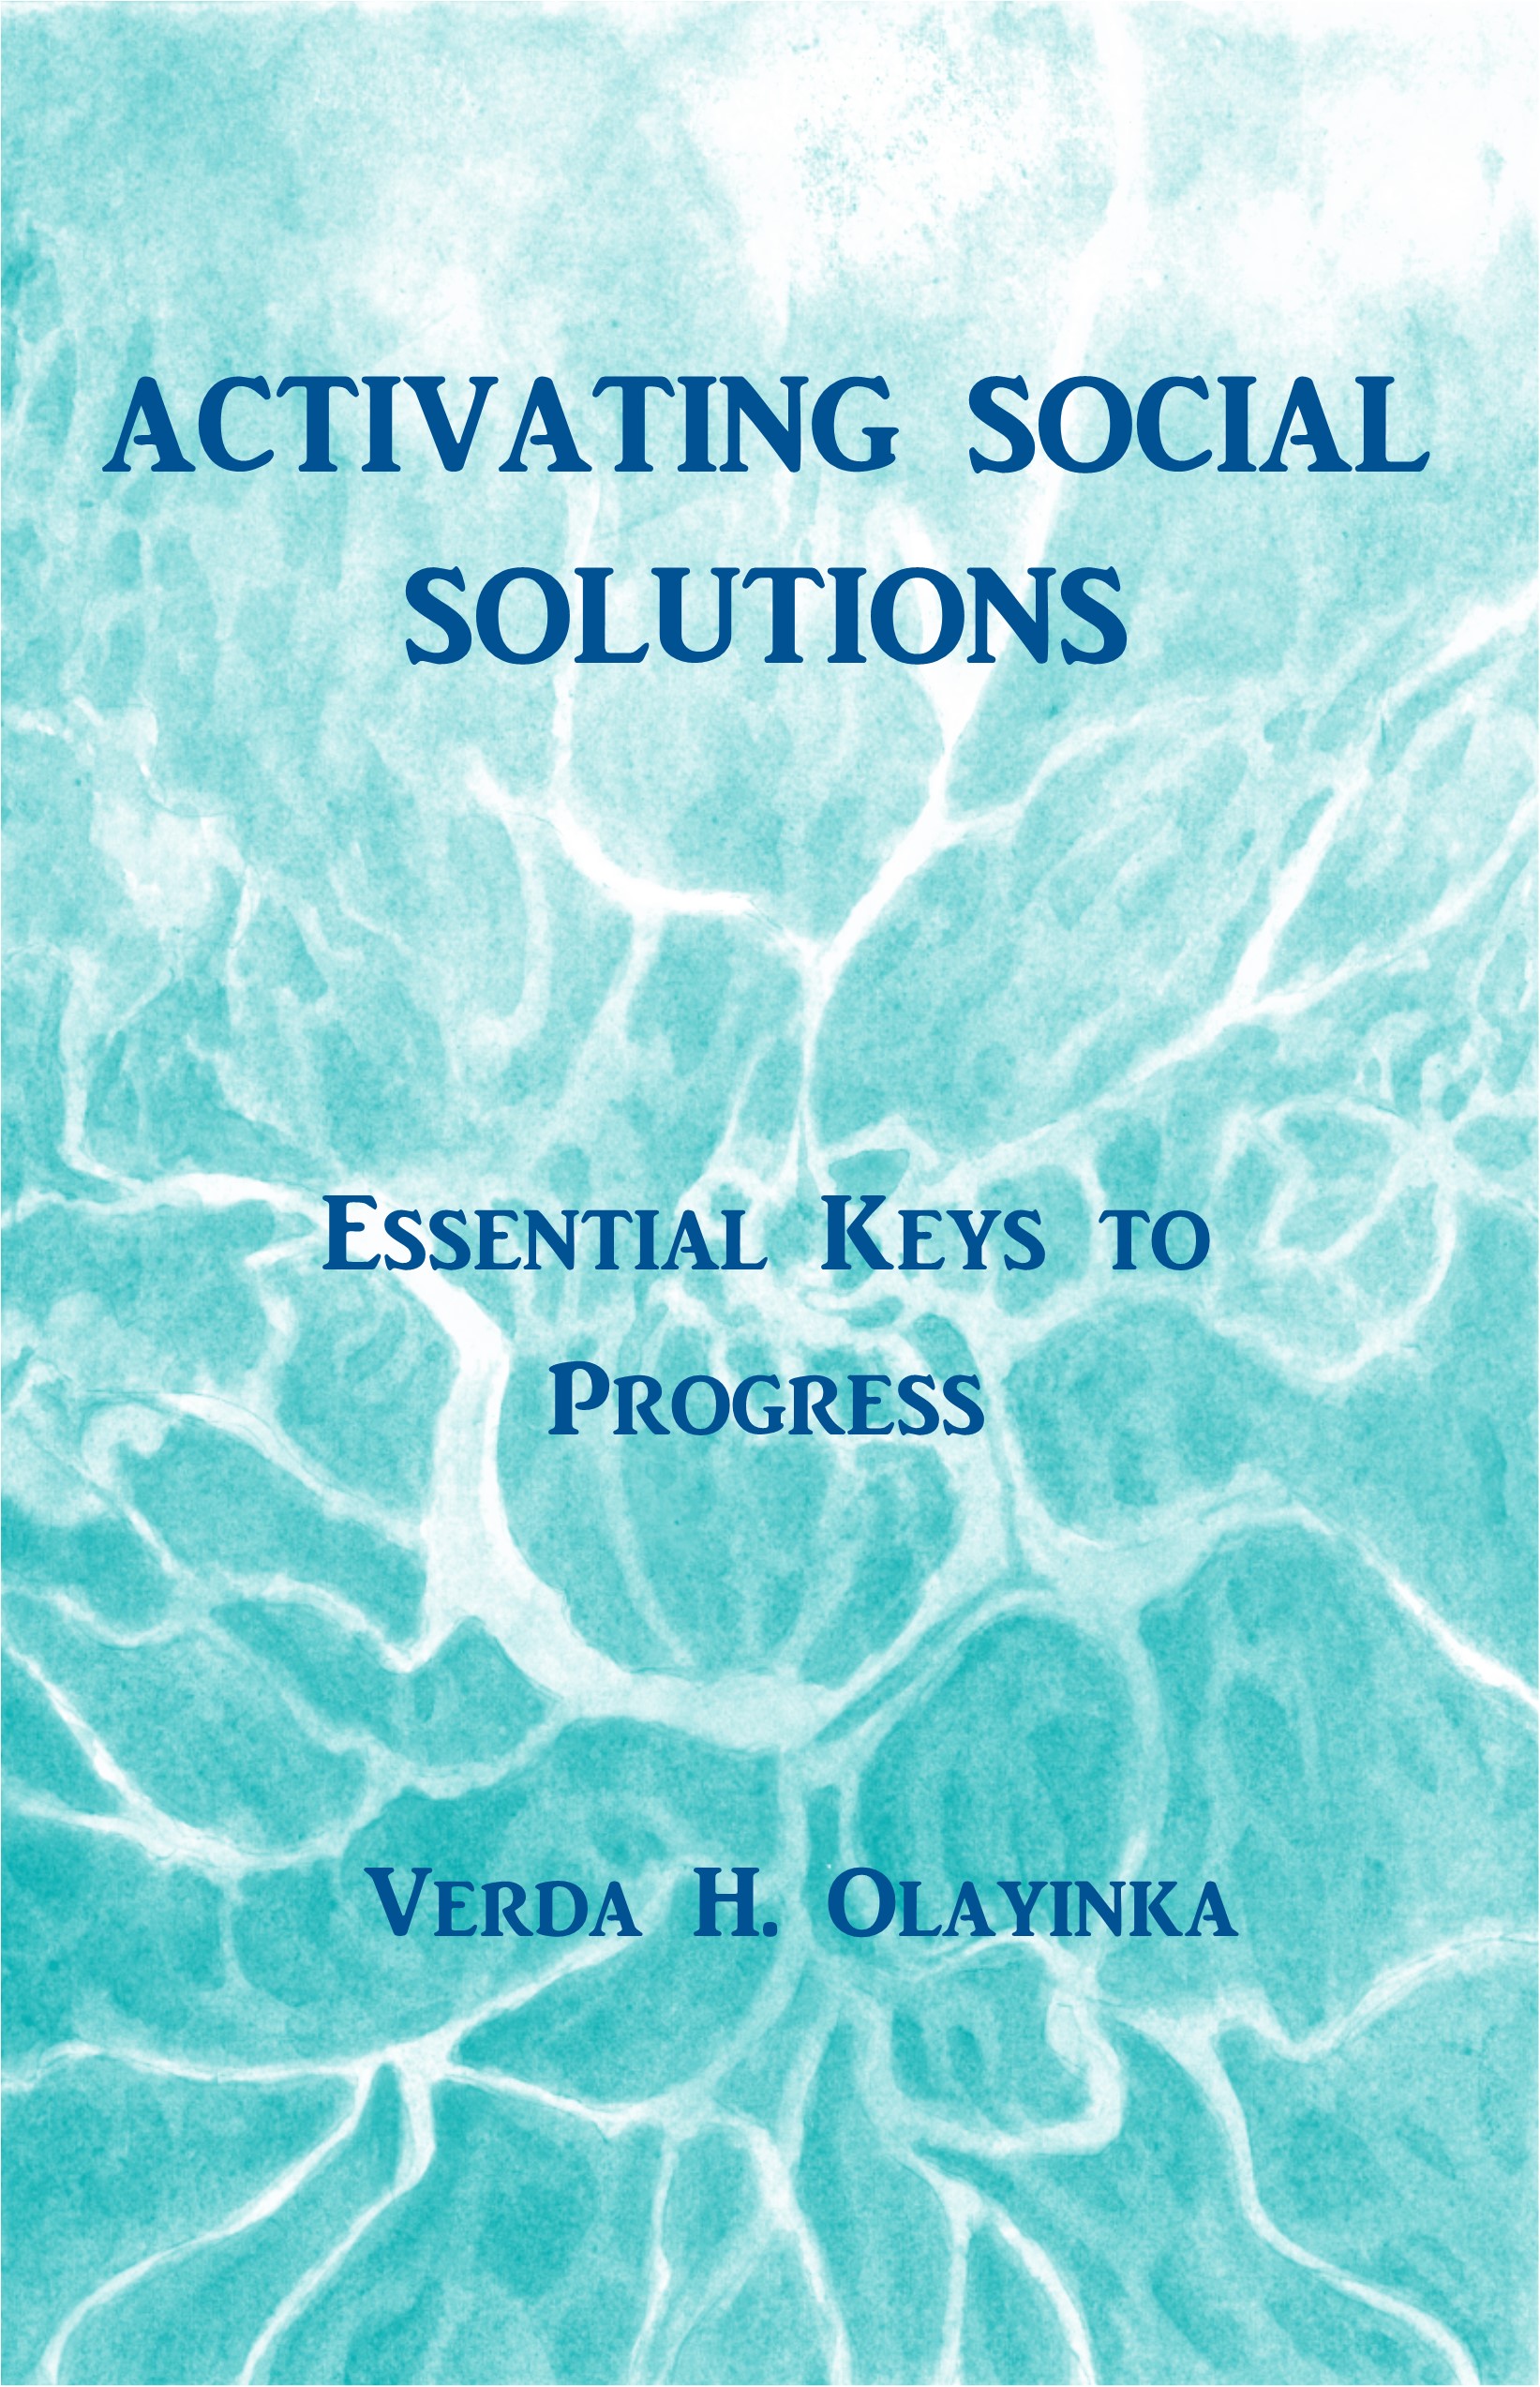 Activating Social Solutions-A definitive guide for personal, spiritual, and physical abundance